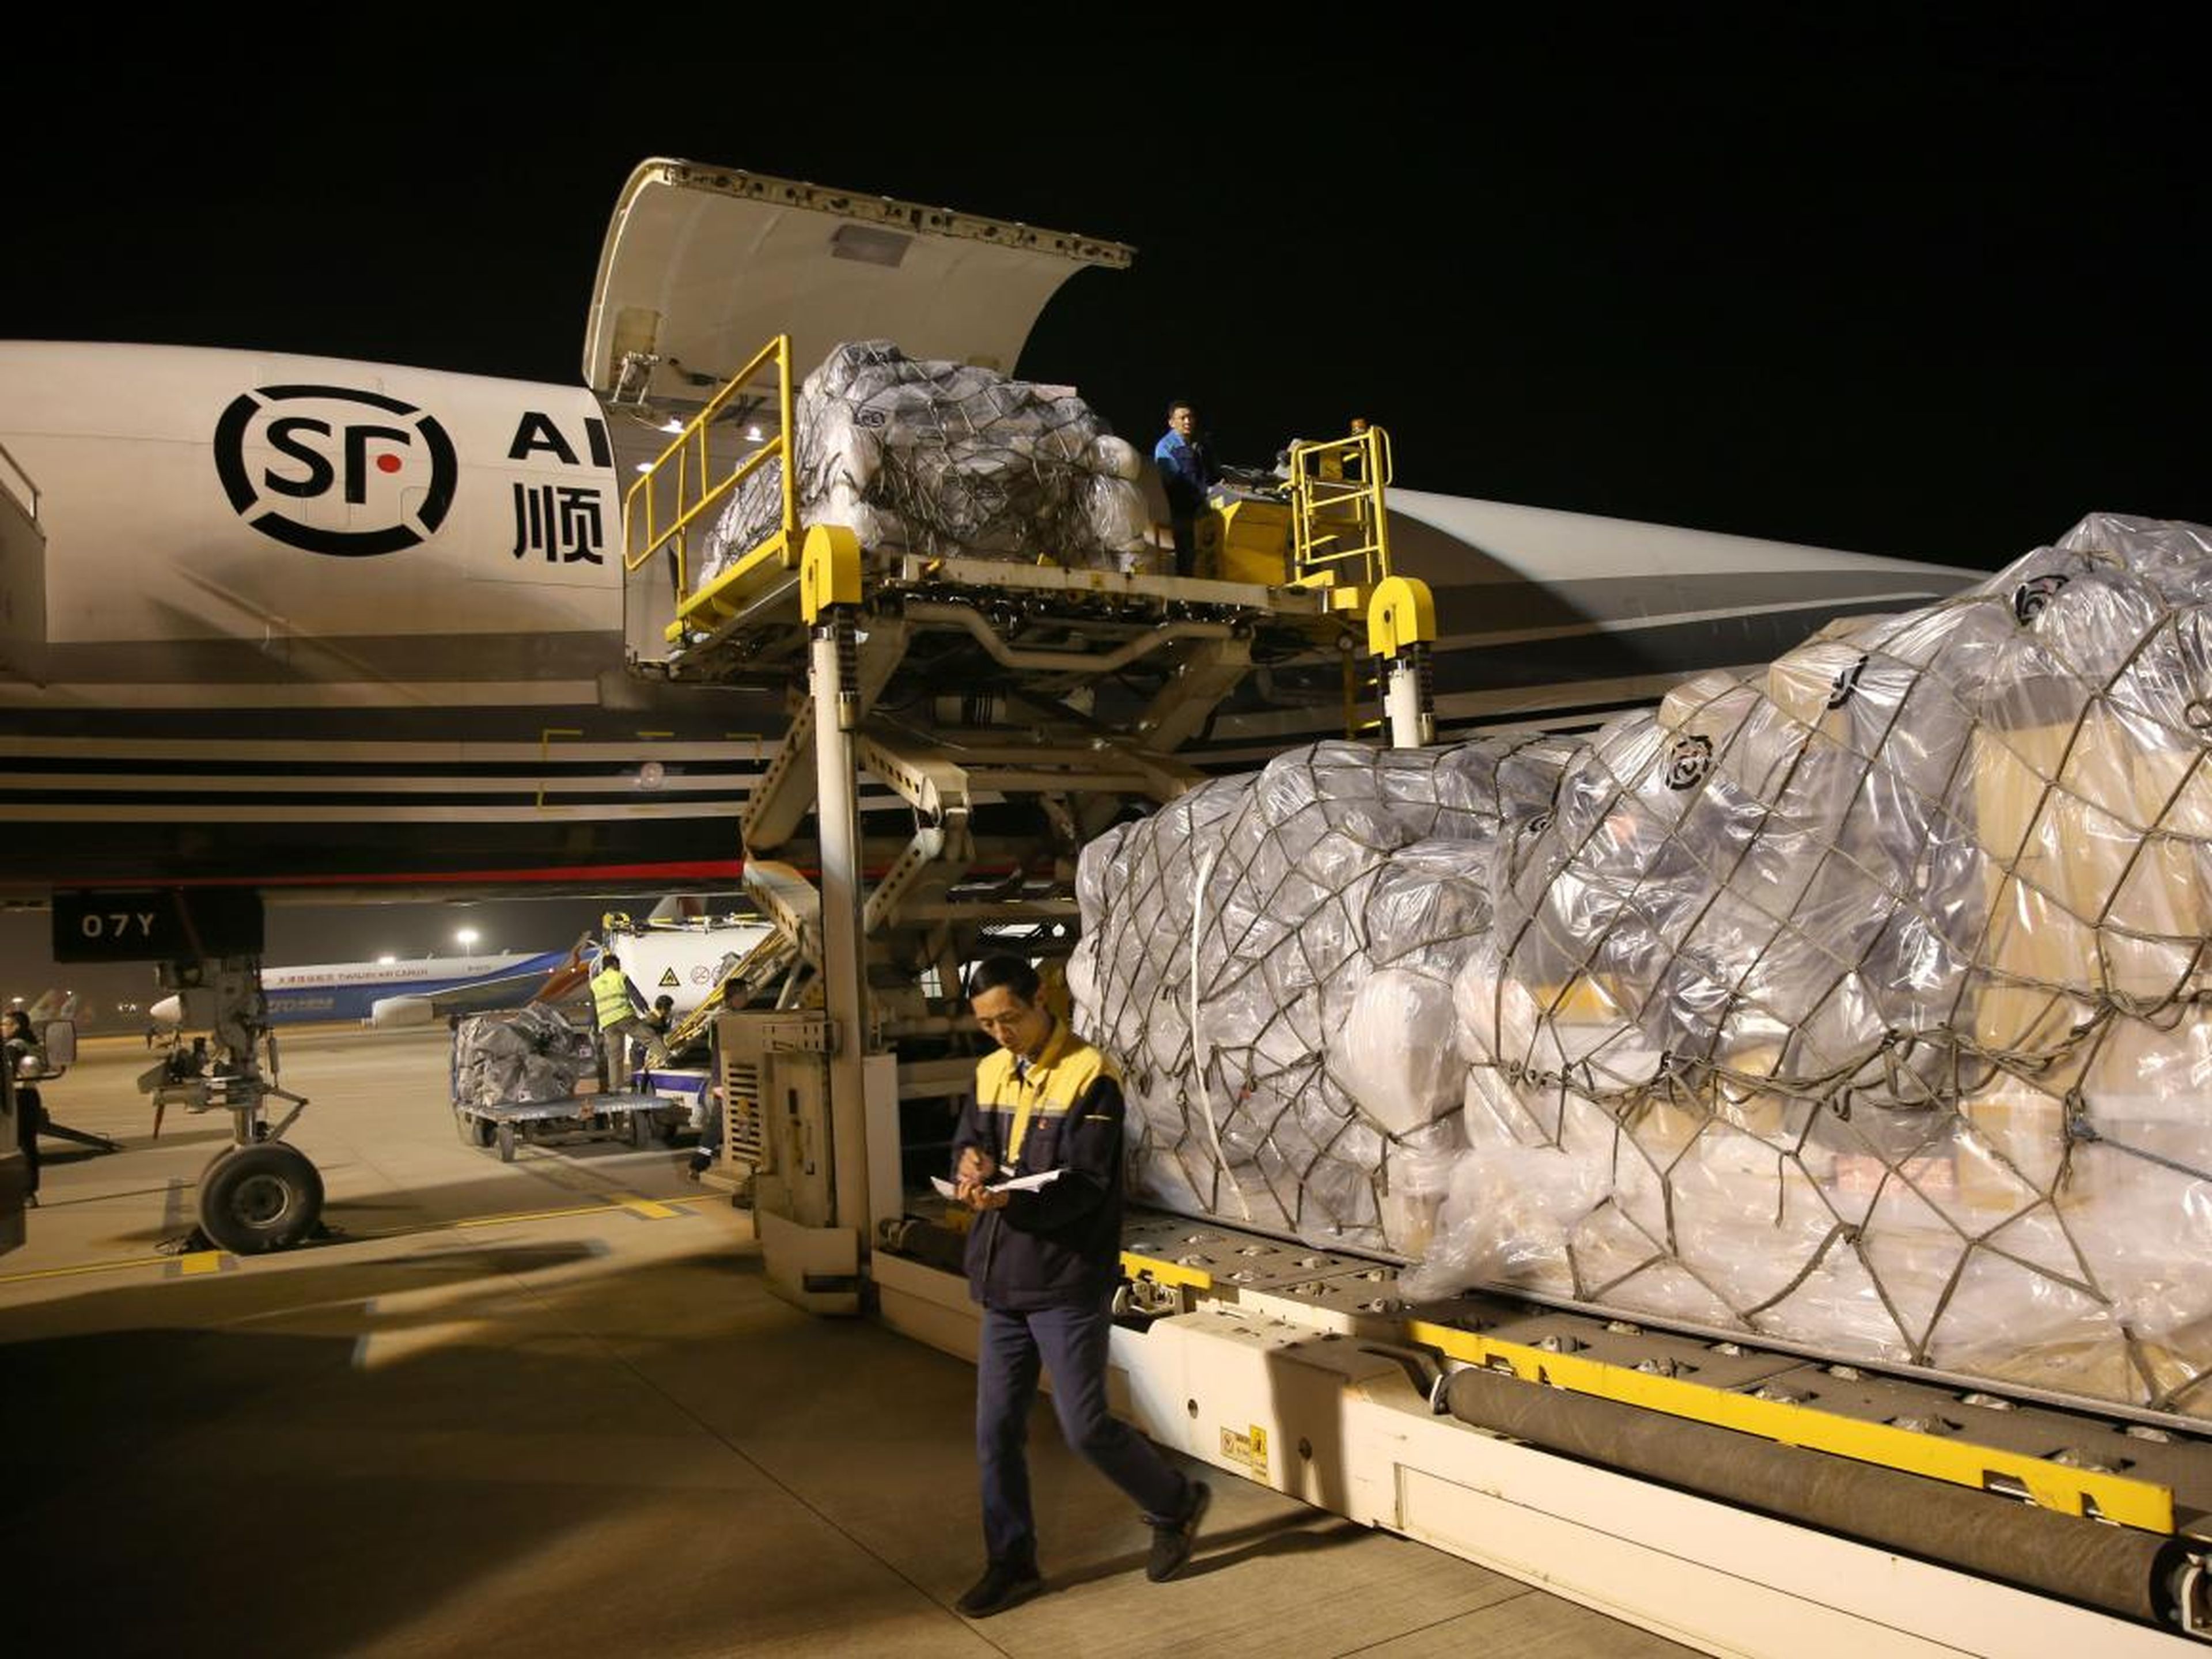 Large amounts of cargo can be seen being loaded into airplanes, like this SF Airlines Boeing 757 aircraft at Nantong Xingdong International Airport.